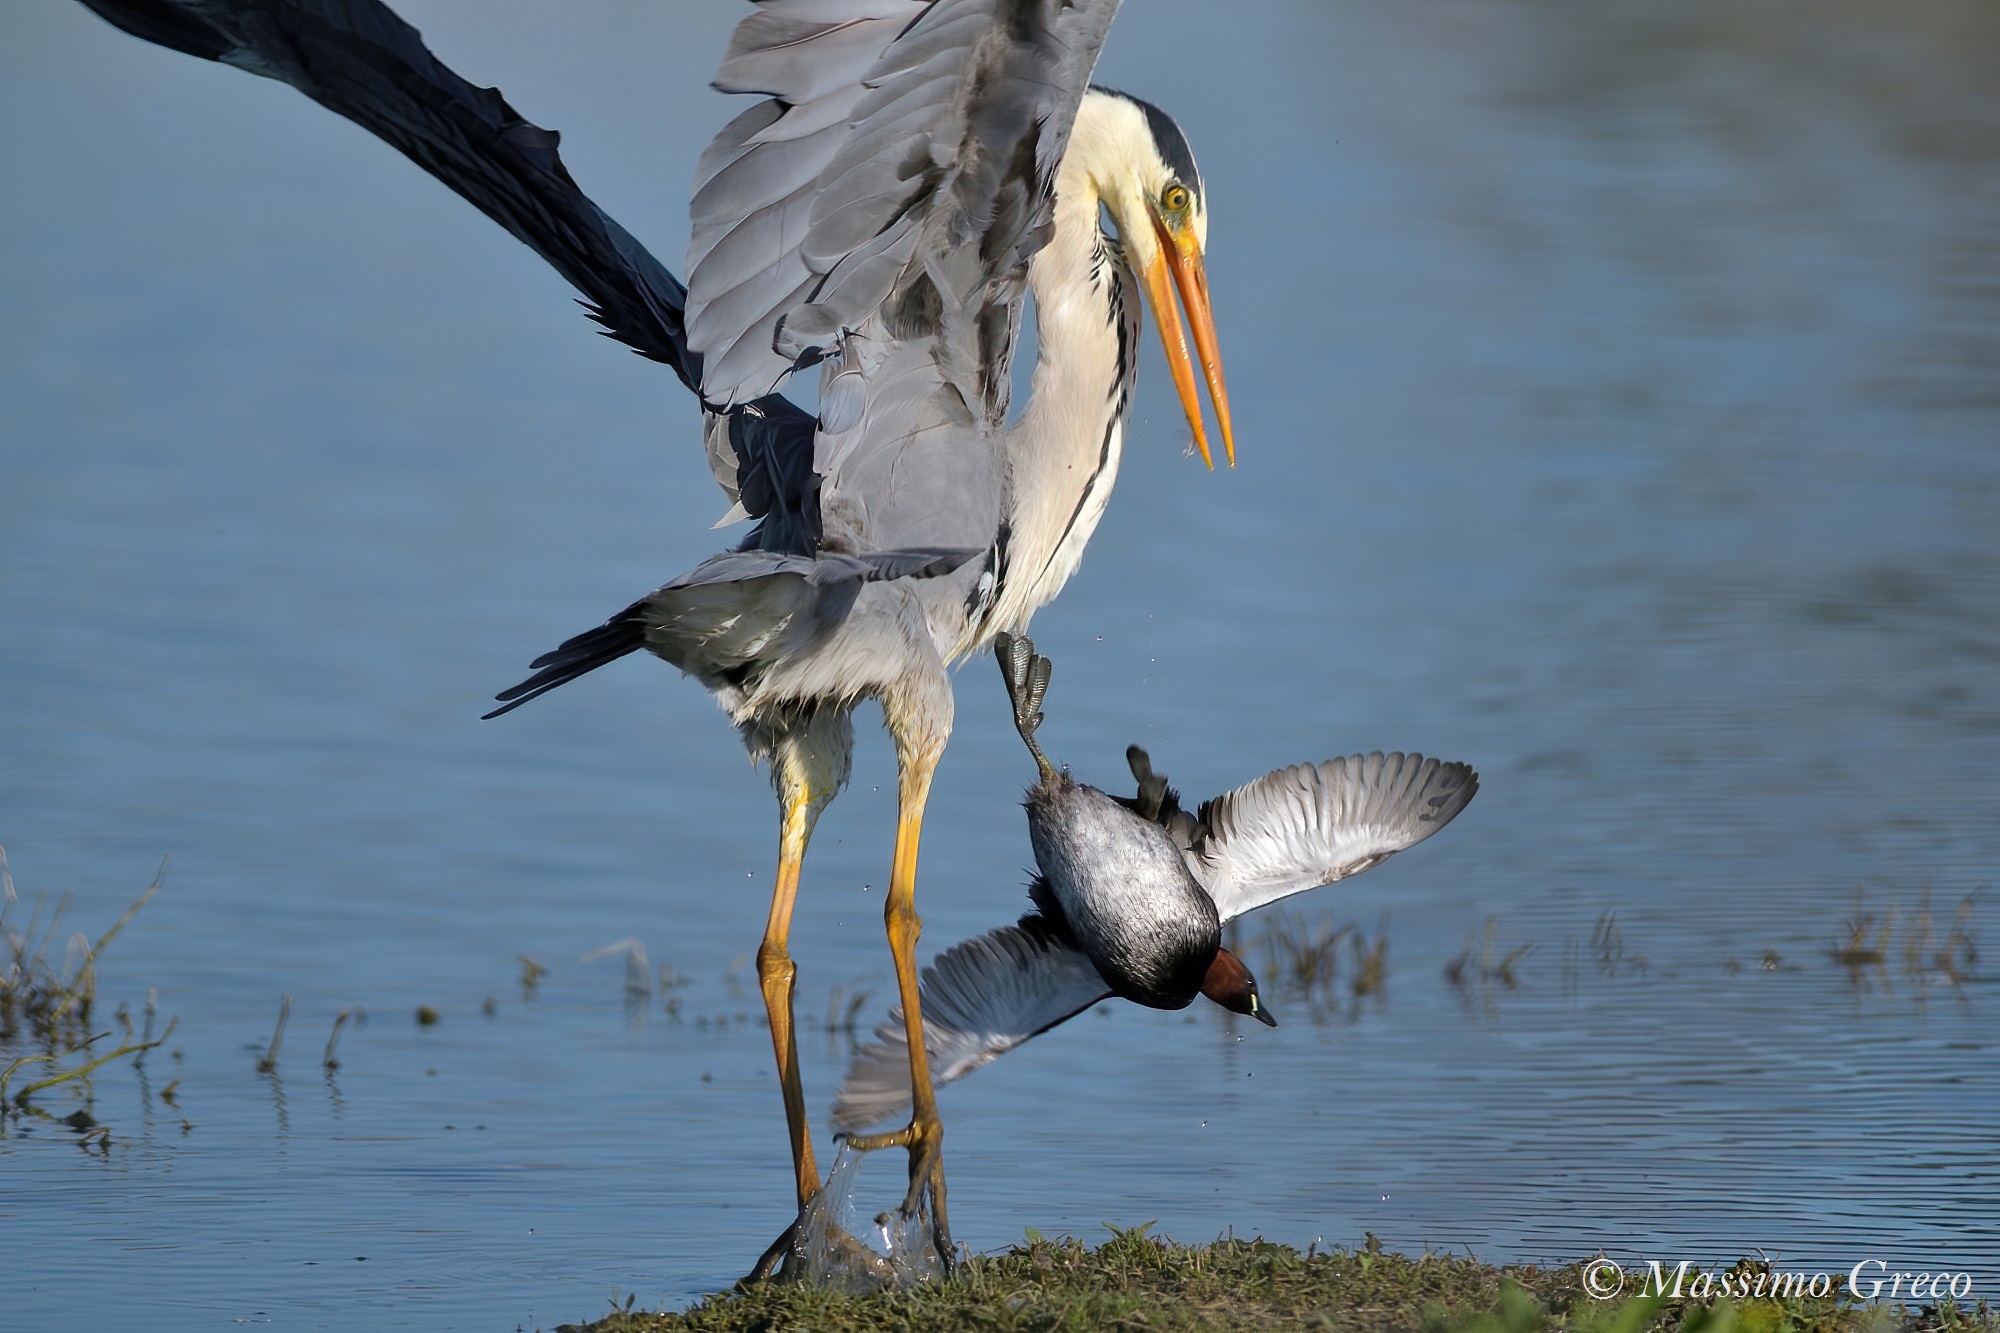 Ash heron struggling with an unlikely catch ...